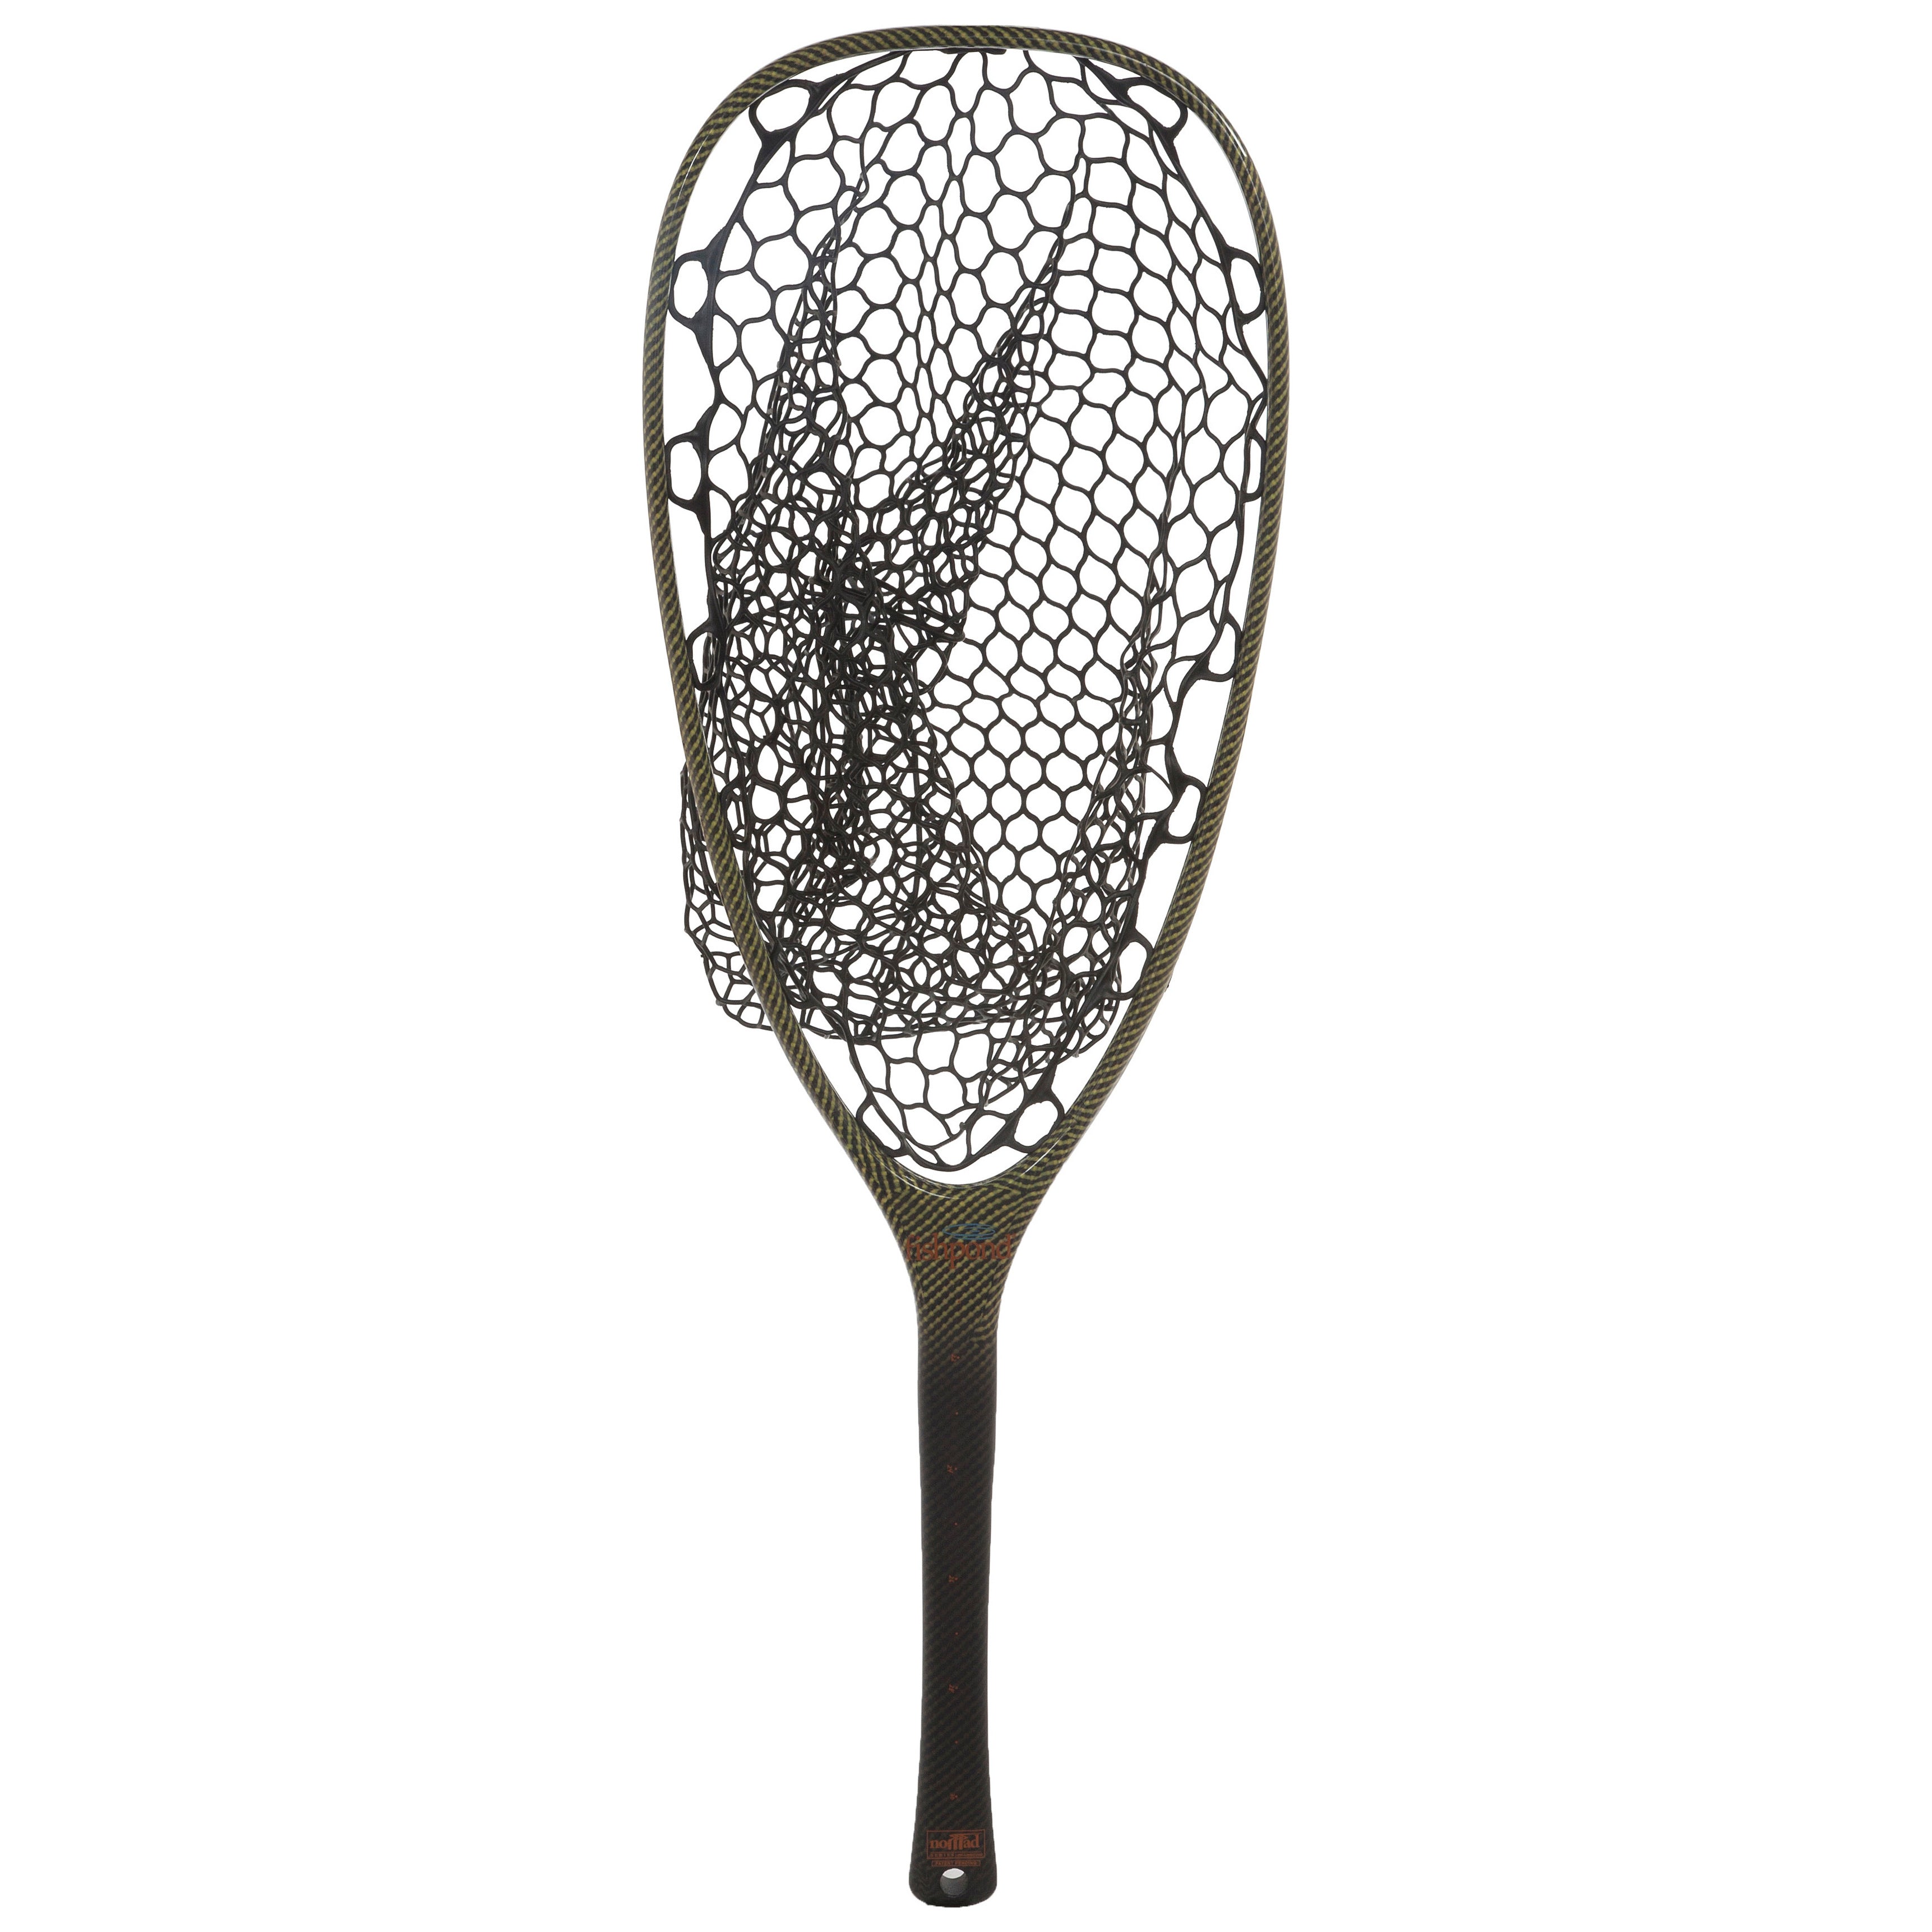 Fishpond Nomad Emerger Net – Tailwaters Fly Fishing